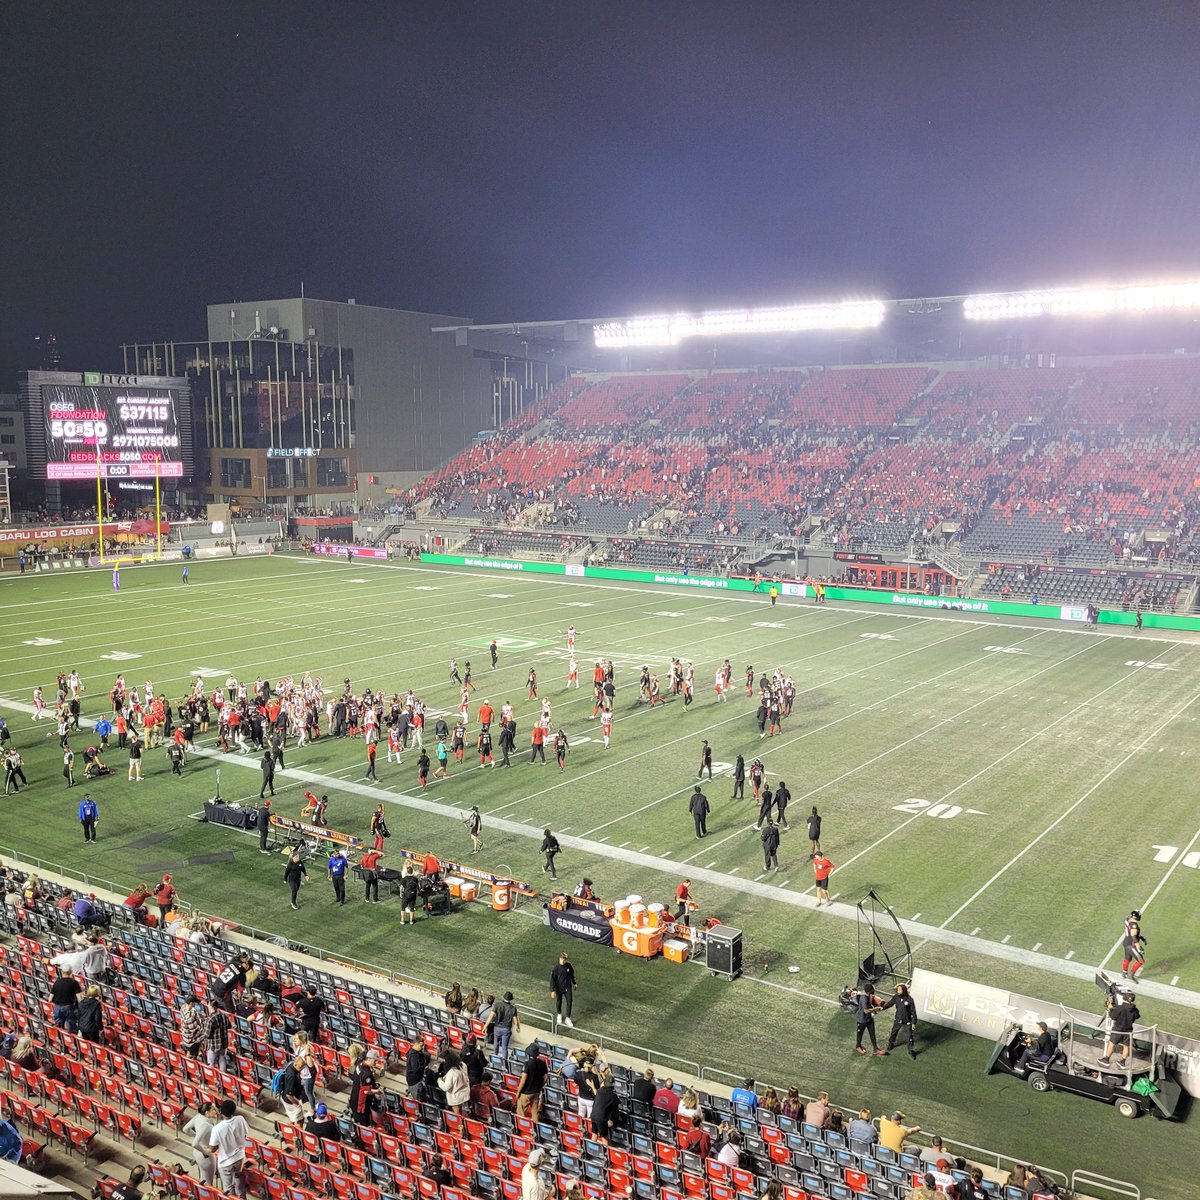 REDBLACKS lose 26-15. 

We simply can't score an offensive touchdown.  So frustrating.  

Sad for my City. #RNation